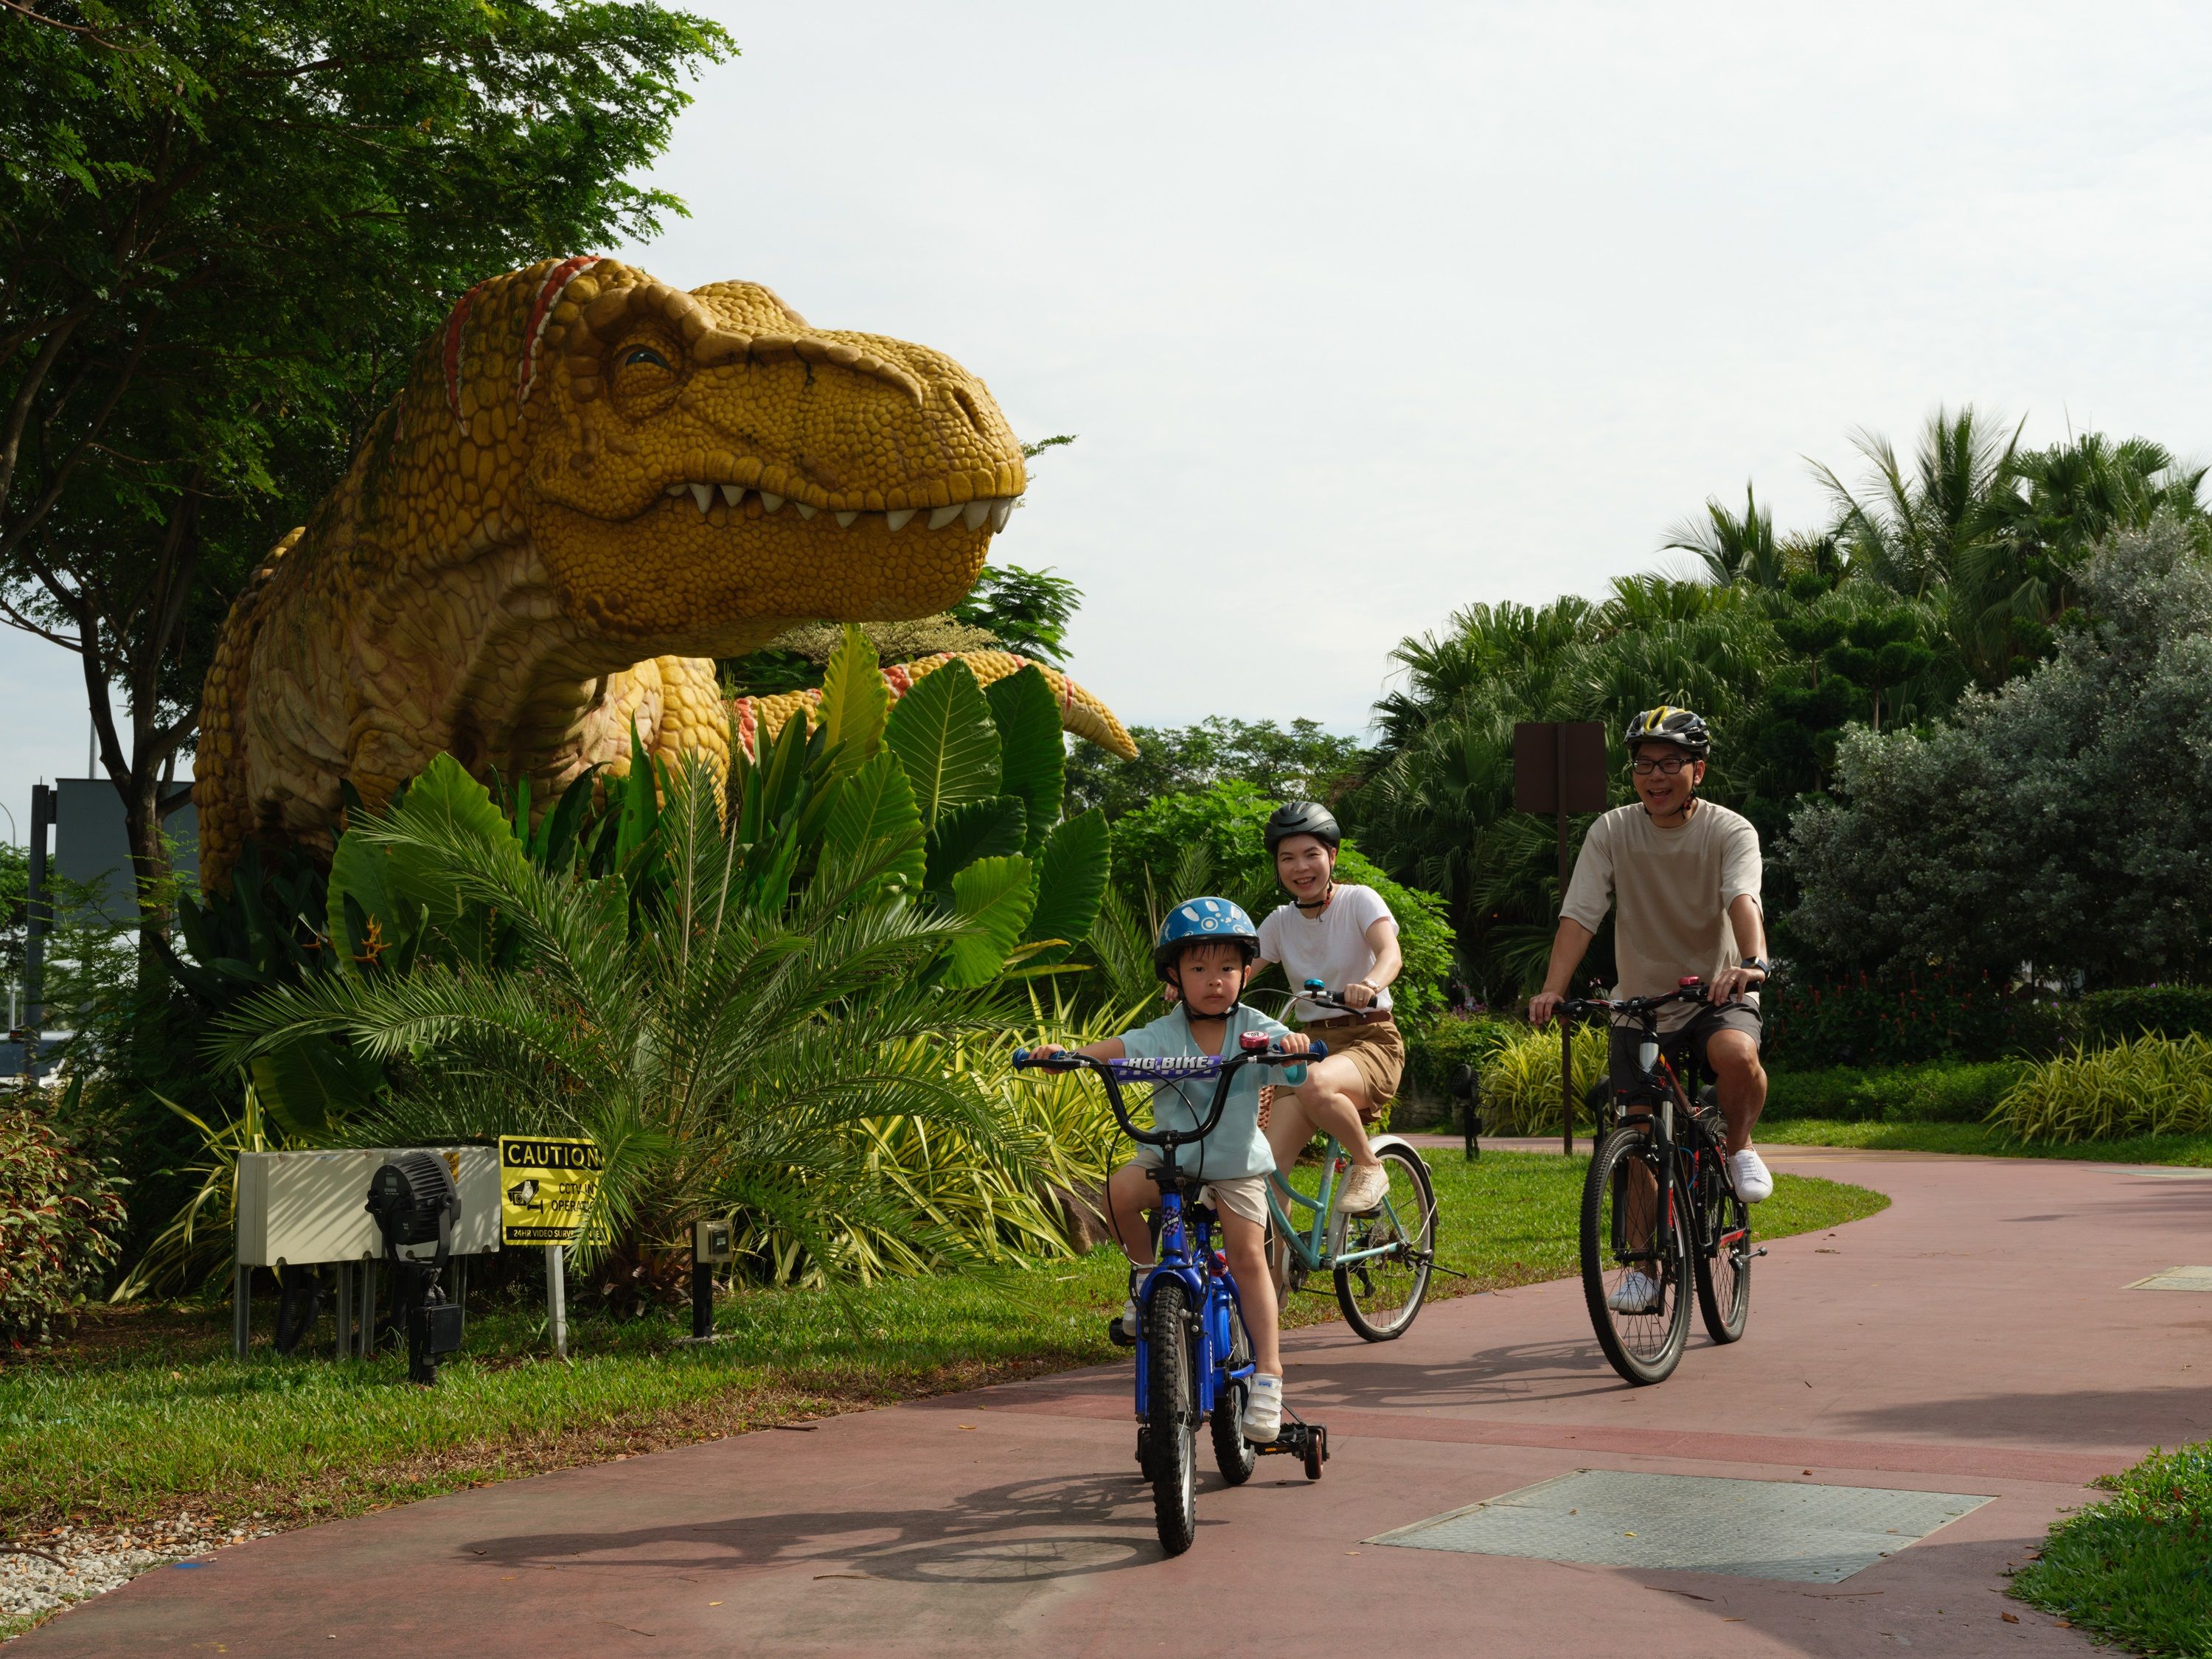 A small family riding bicycles at a park.